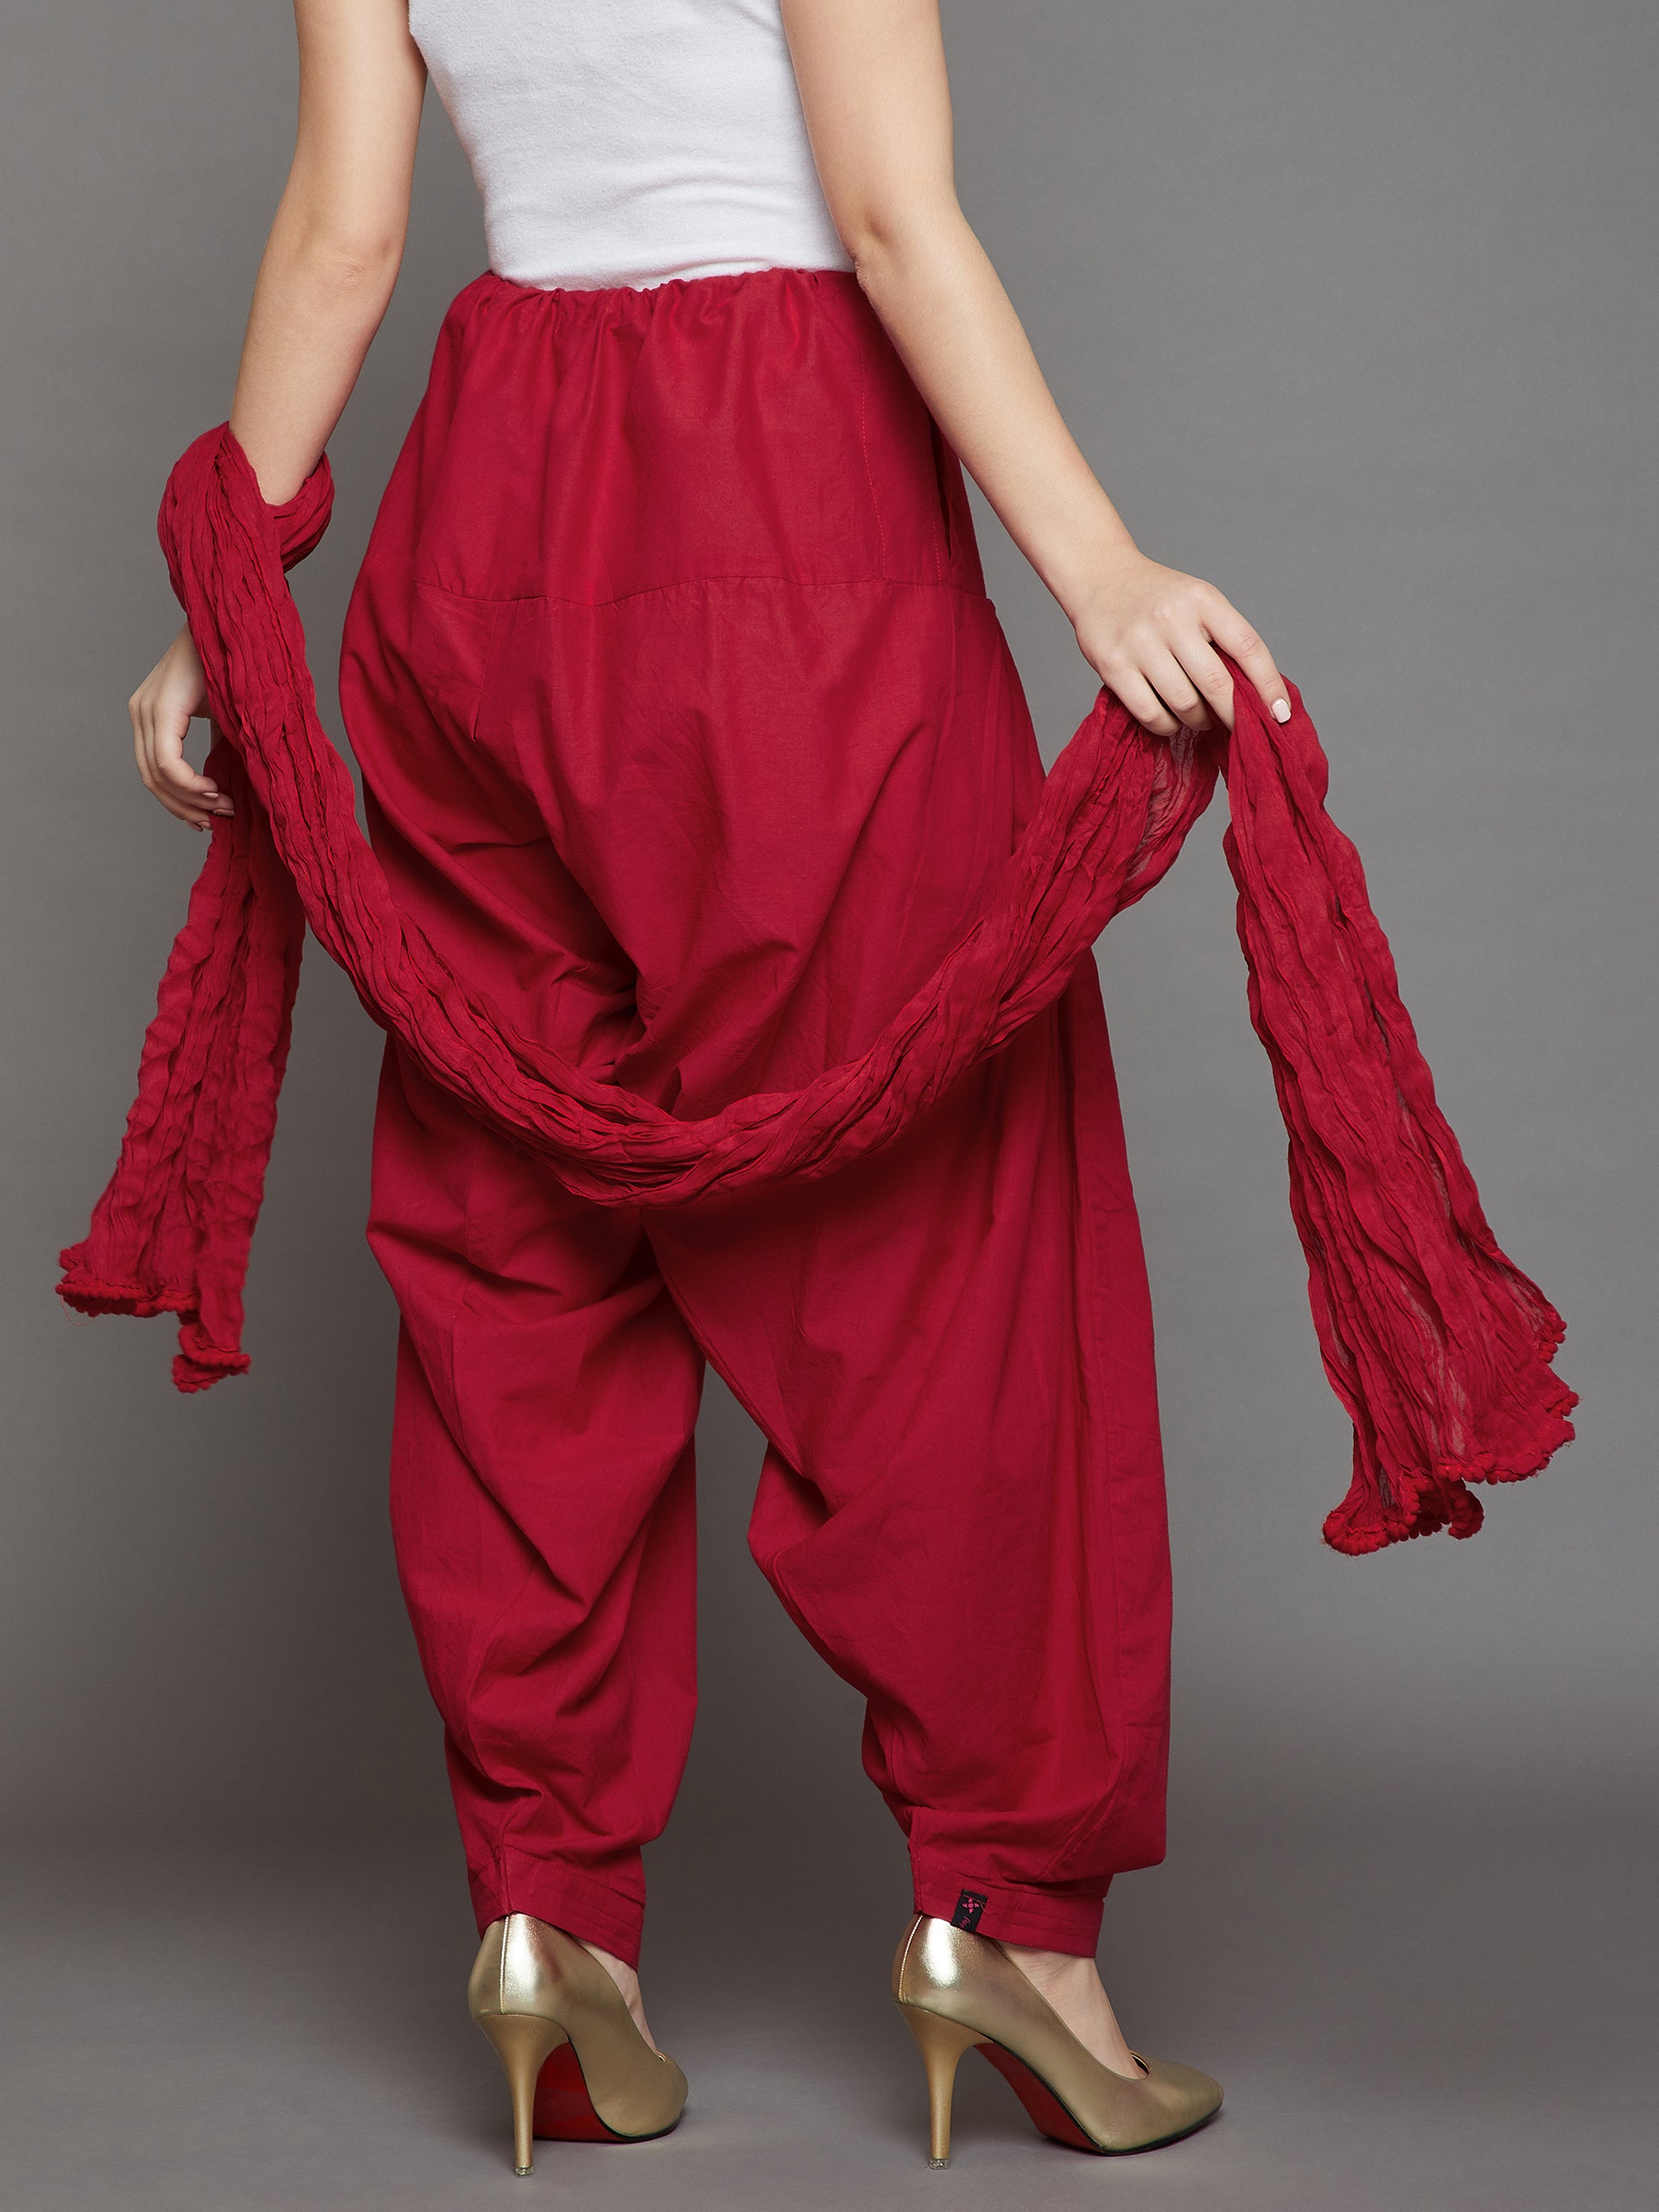 Shop Now Plain Patiala Red Color Cotton Patiala Salwar For Girl – Lady India